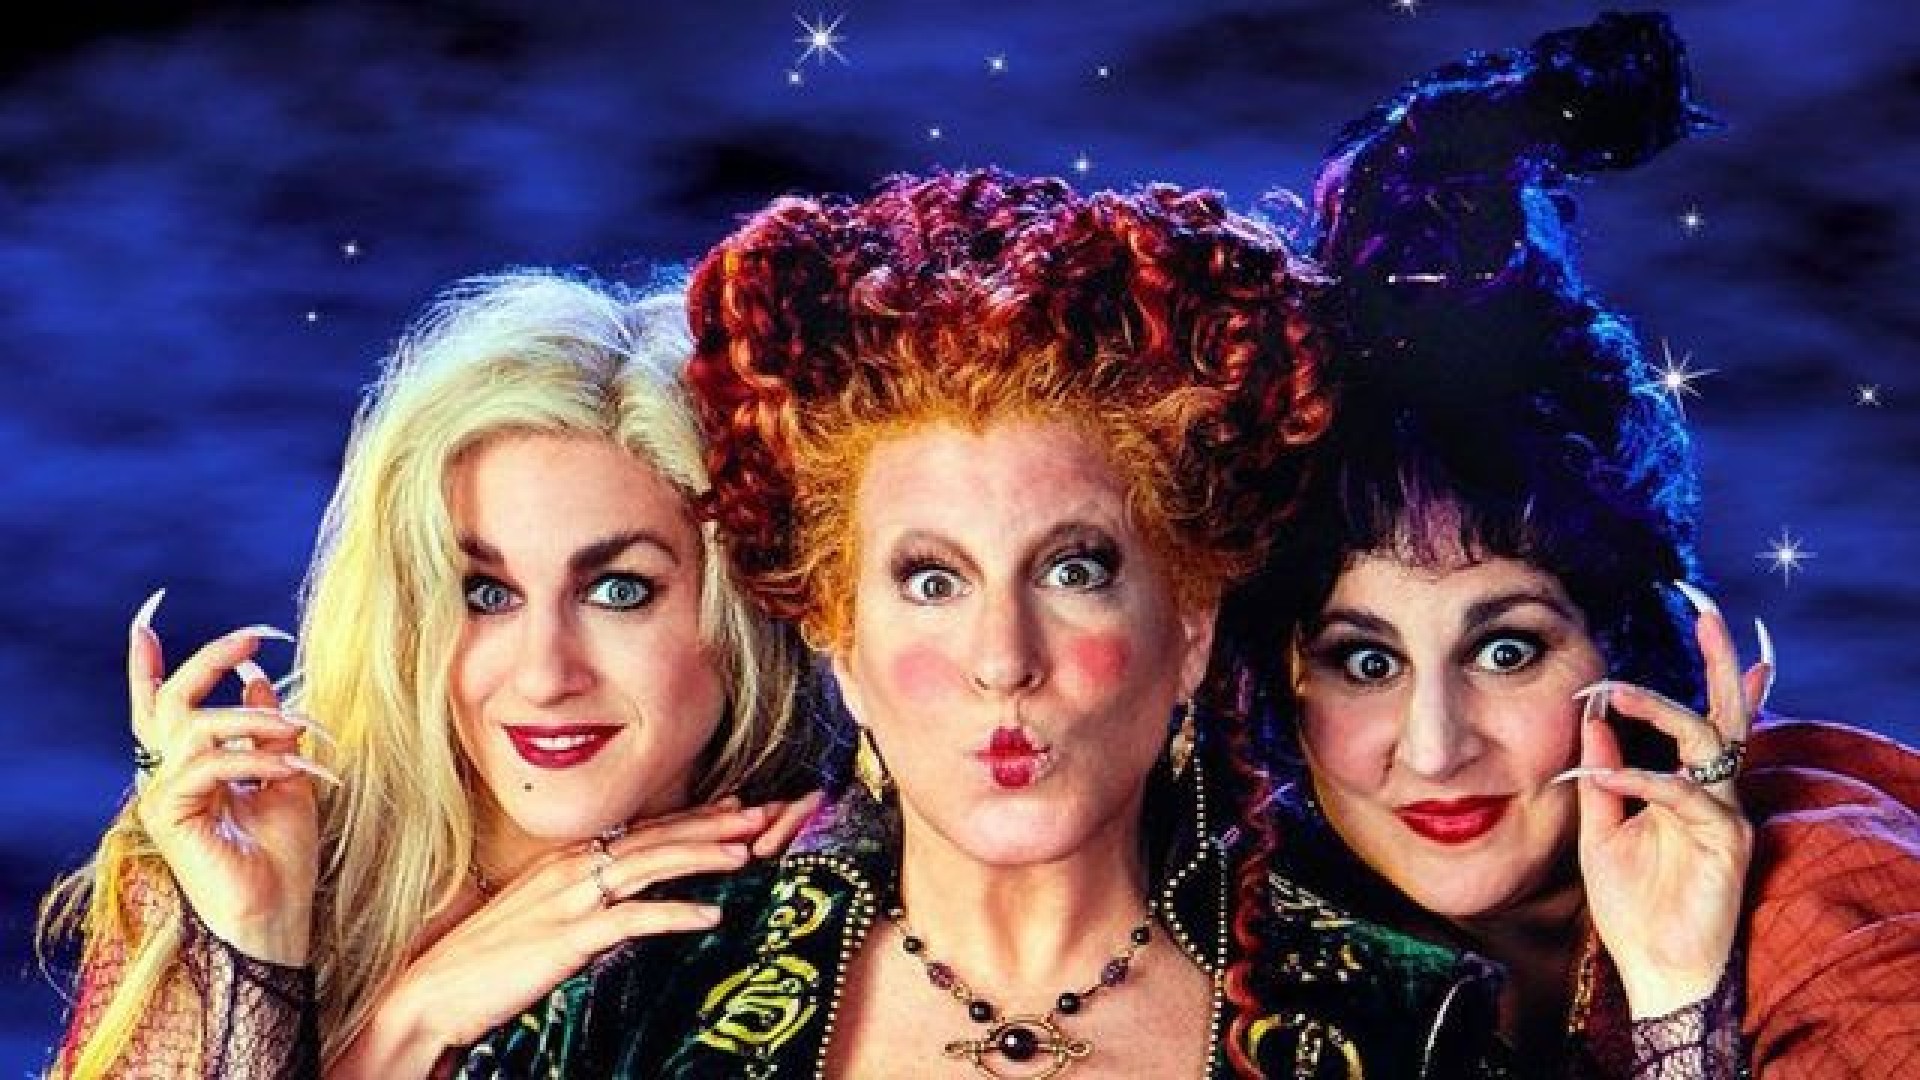 It's official: Sanderson Sisters will reunite for 'Hocus Pocus 2'